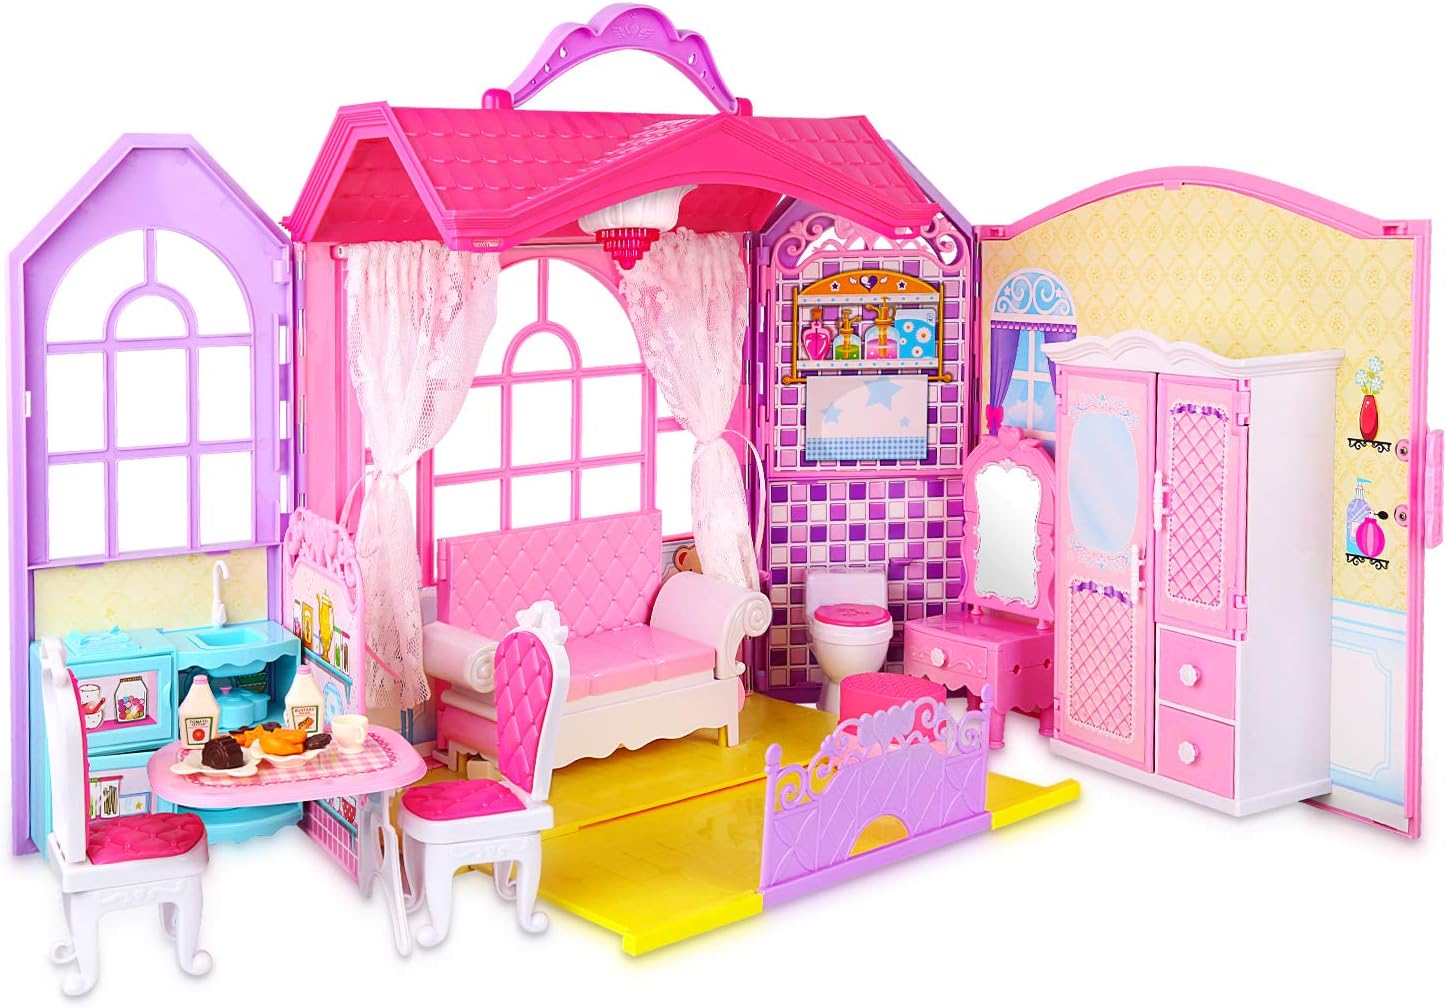 I got this for my daughter for Christmas. It fits Barbie dolls and is similar to the Barbie fold out house. BUT, this one is less money and has a ton of really cute accessories My daughter LOVED it and has been playing with it non-stop! It' adorable and folds up nicely to put away. I would recommend!